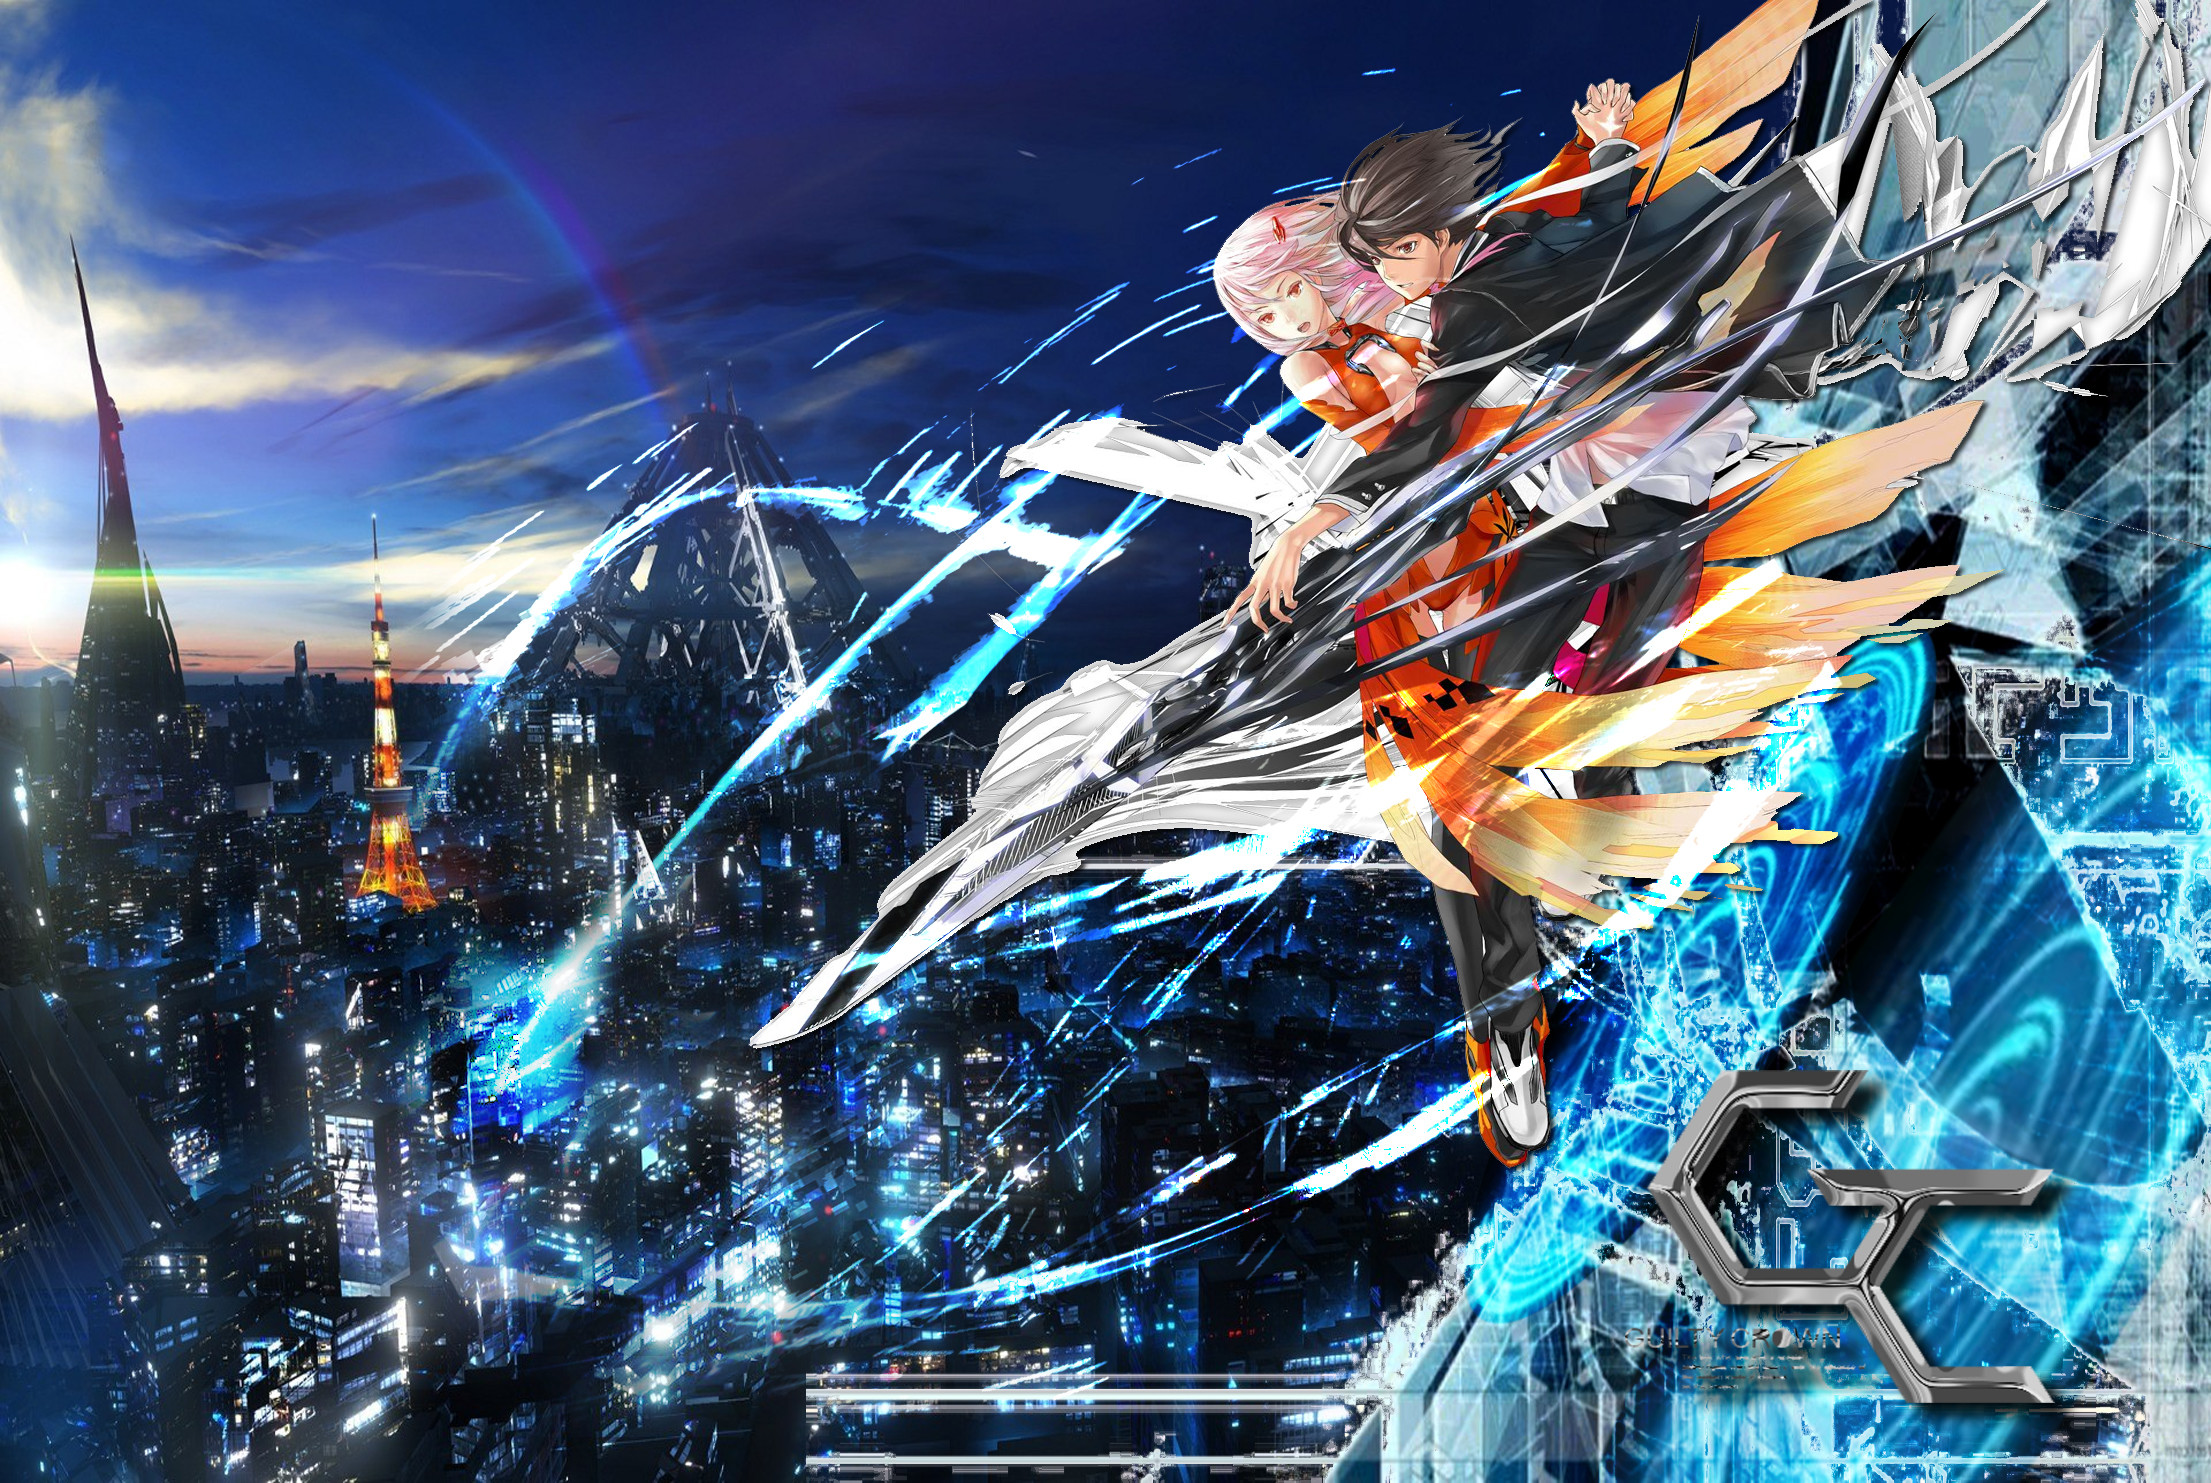 2211x1483 Anime: Guilty Crown Really good anime in my opinion. Genre: Action, Drama